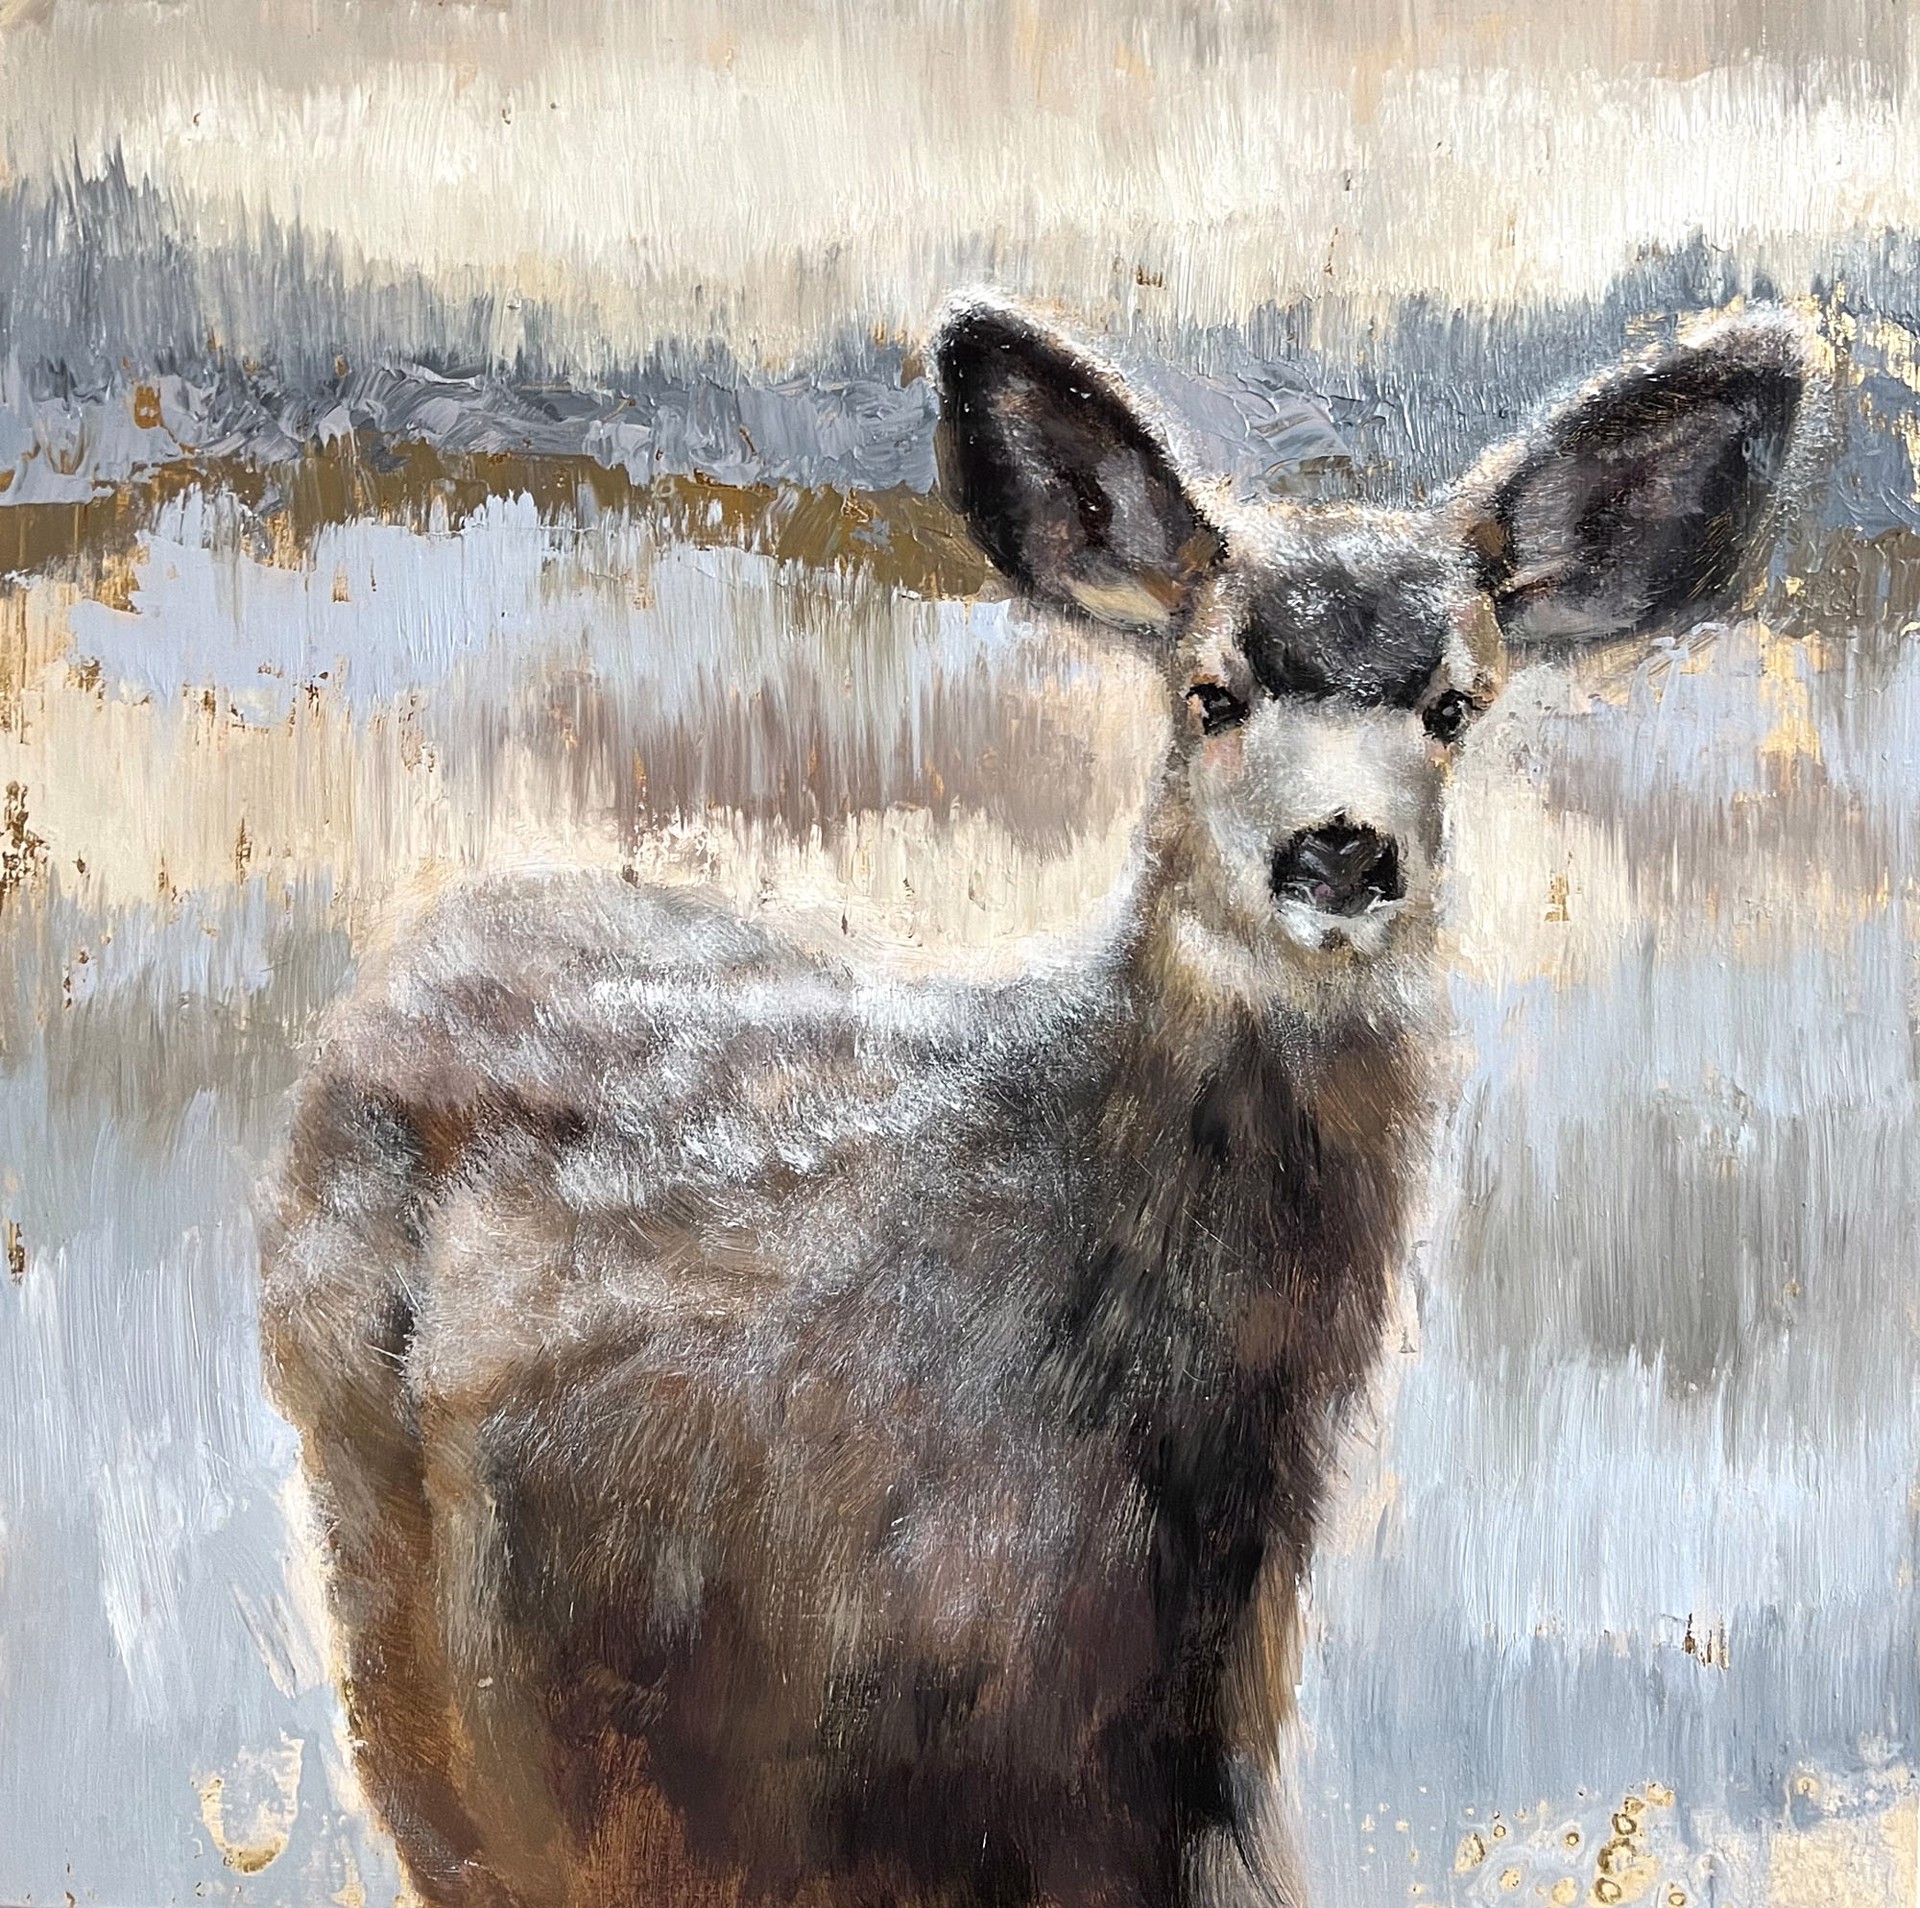 Original Mixed Media Painting By Nealy Riley Featuring A Mule Deer On Abstracted Landscape Background With Gold Details